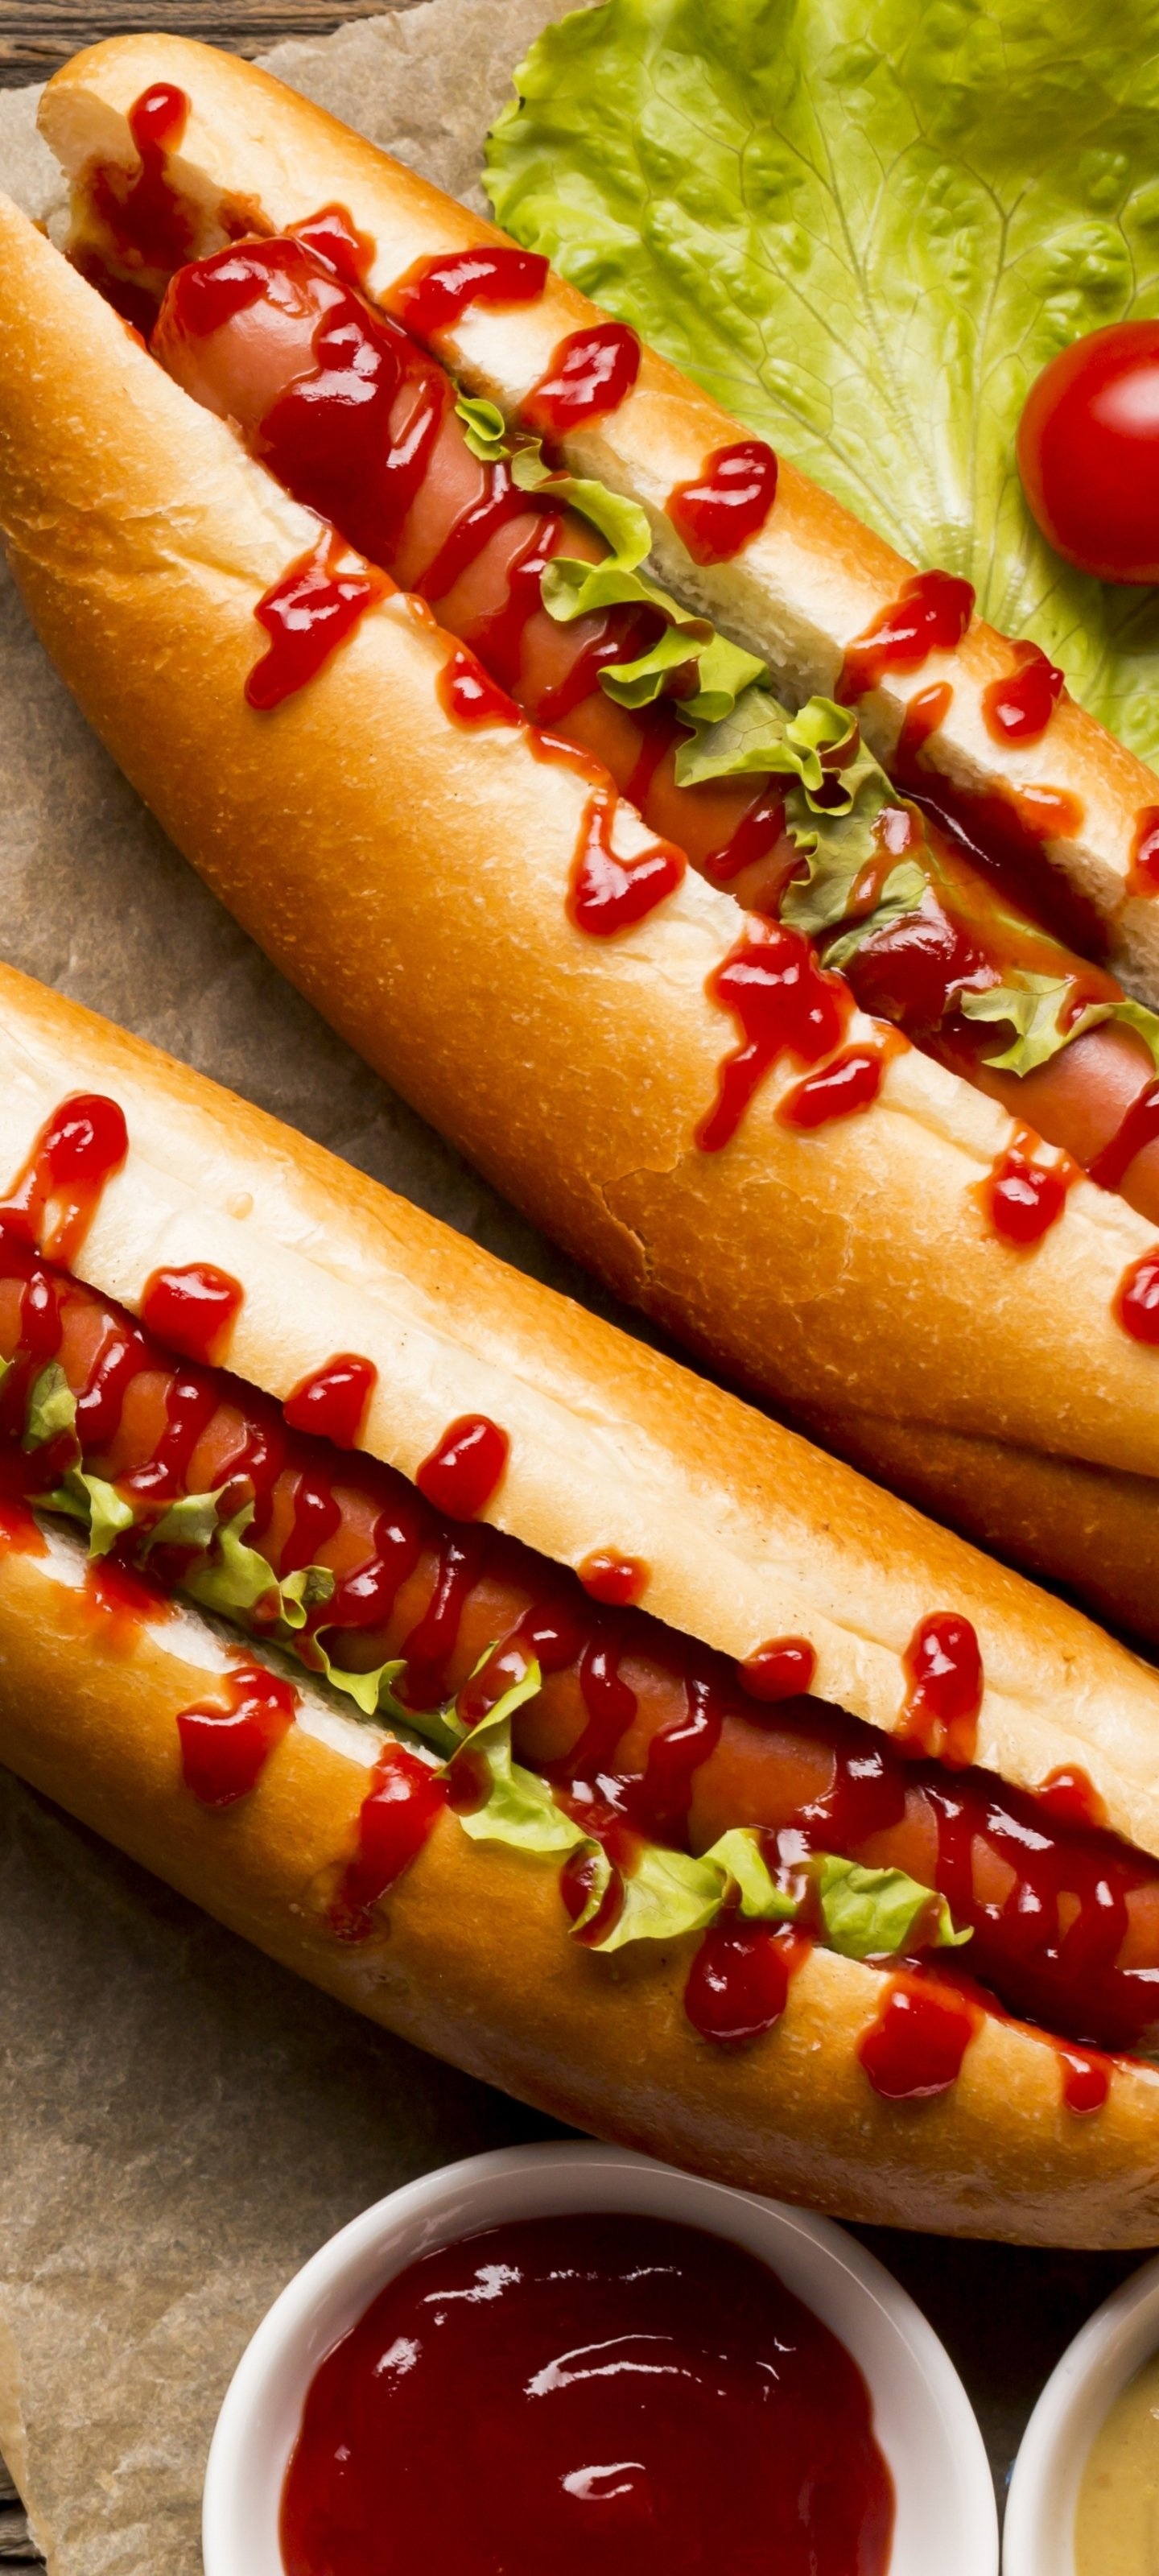 Satisfying snack, Street food delight, Hot dog craving, Fast food treat, 1440x3200 HD Phone